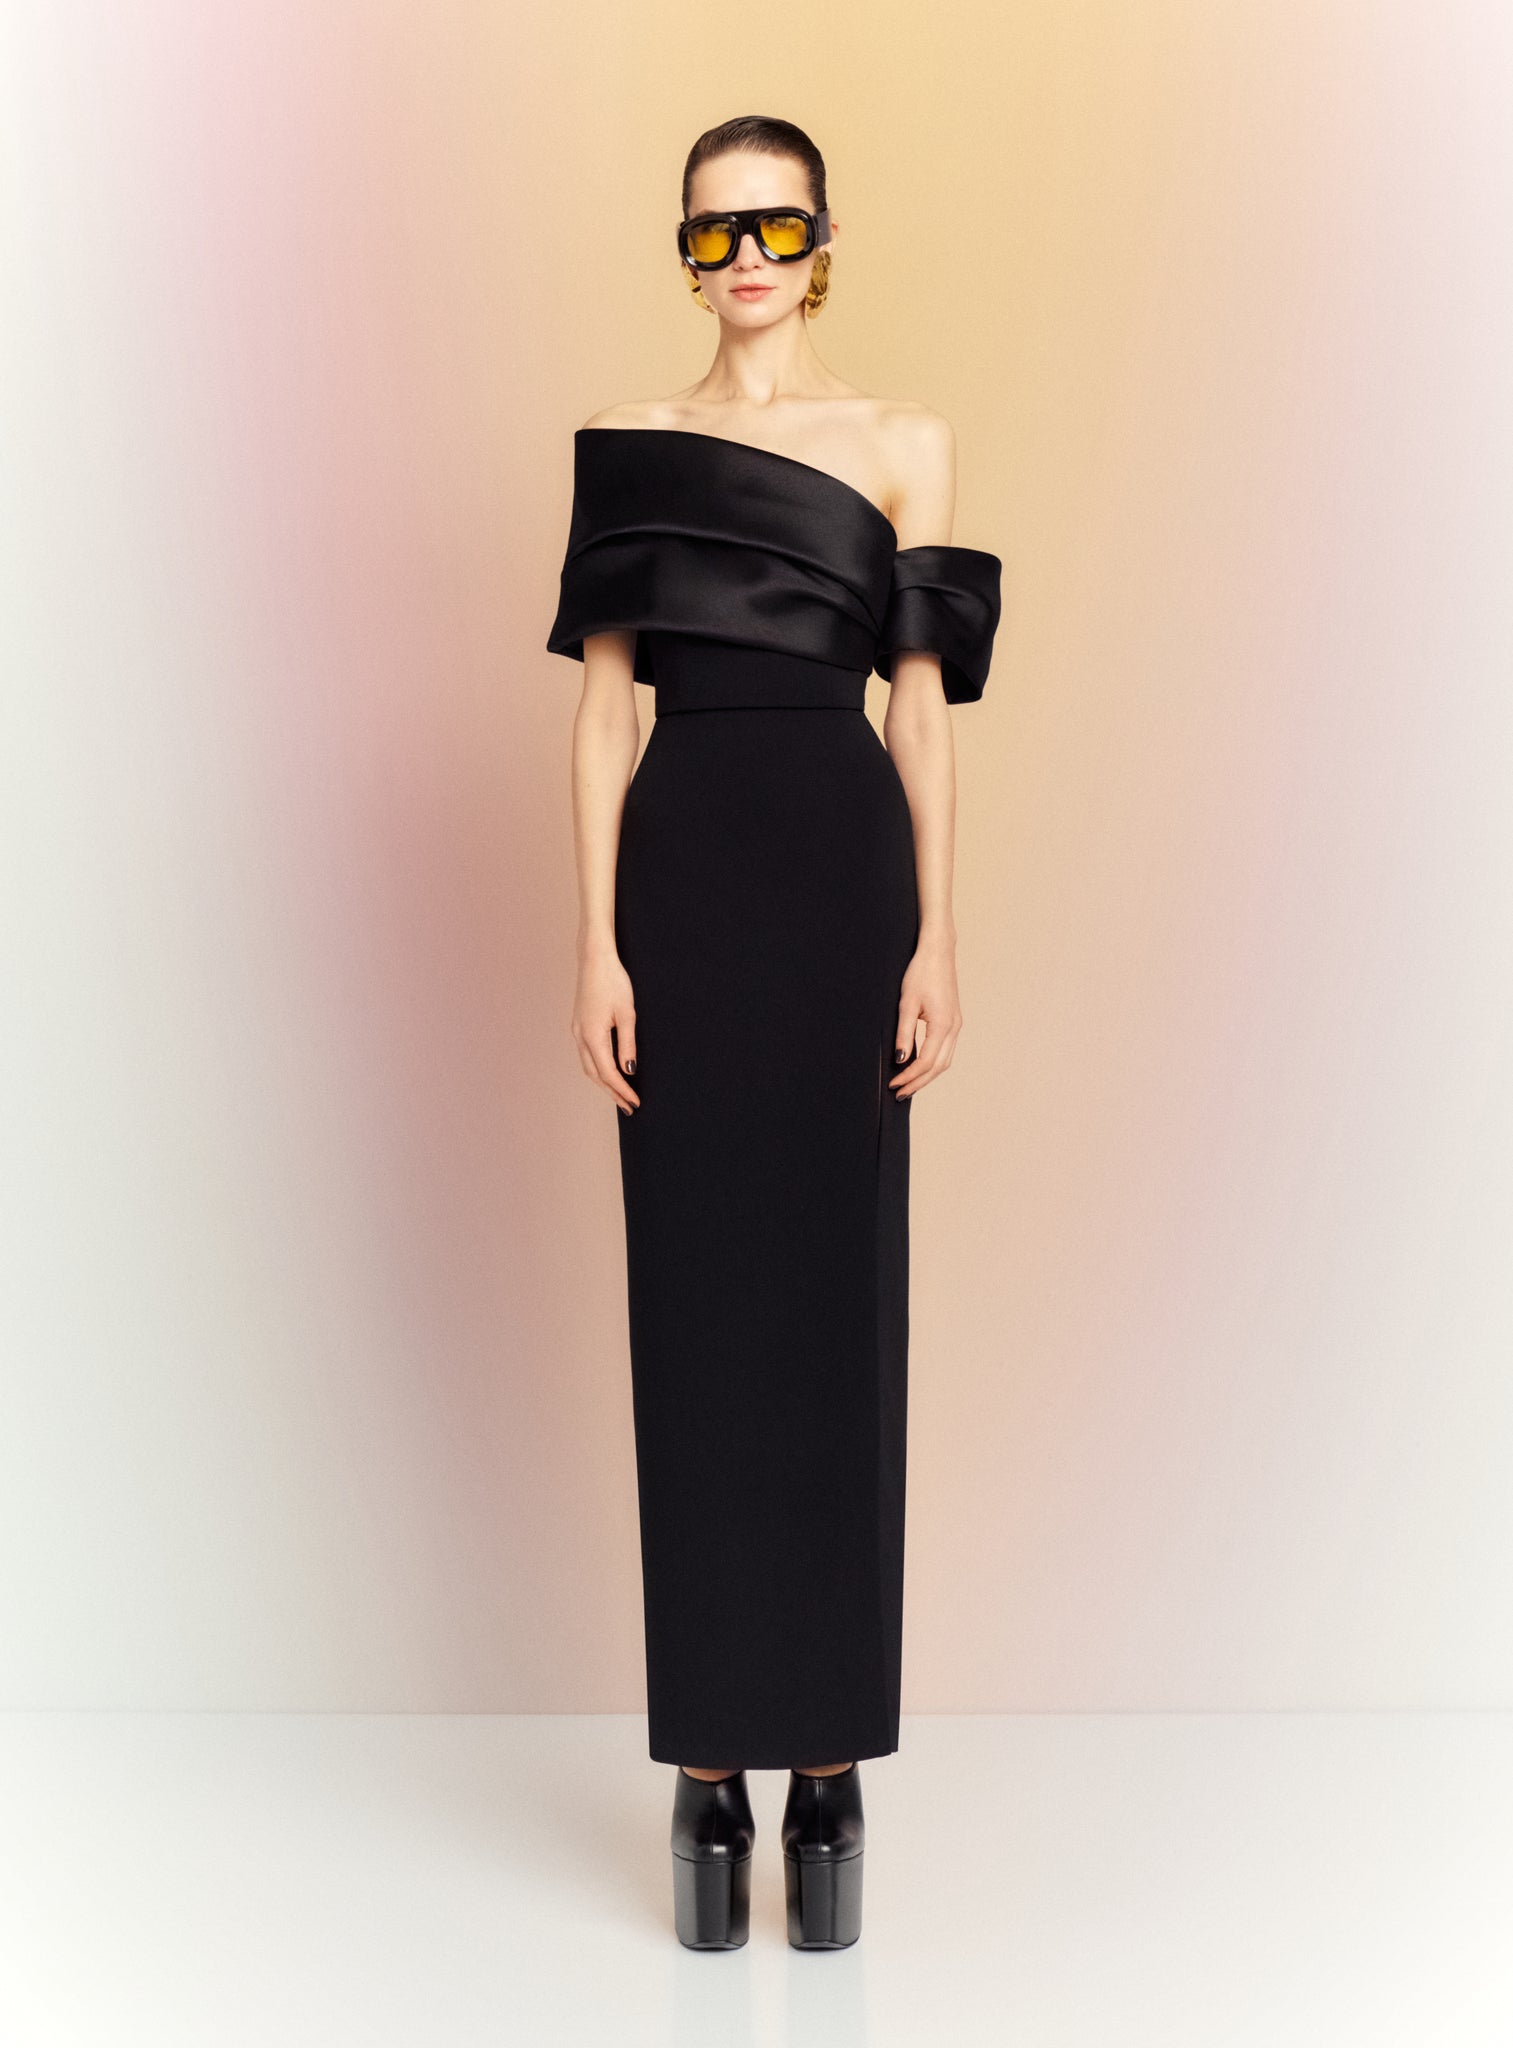 The Alexis Maxi Dress in Black